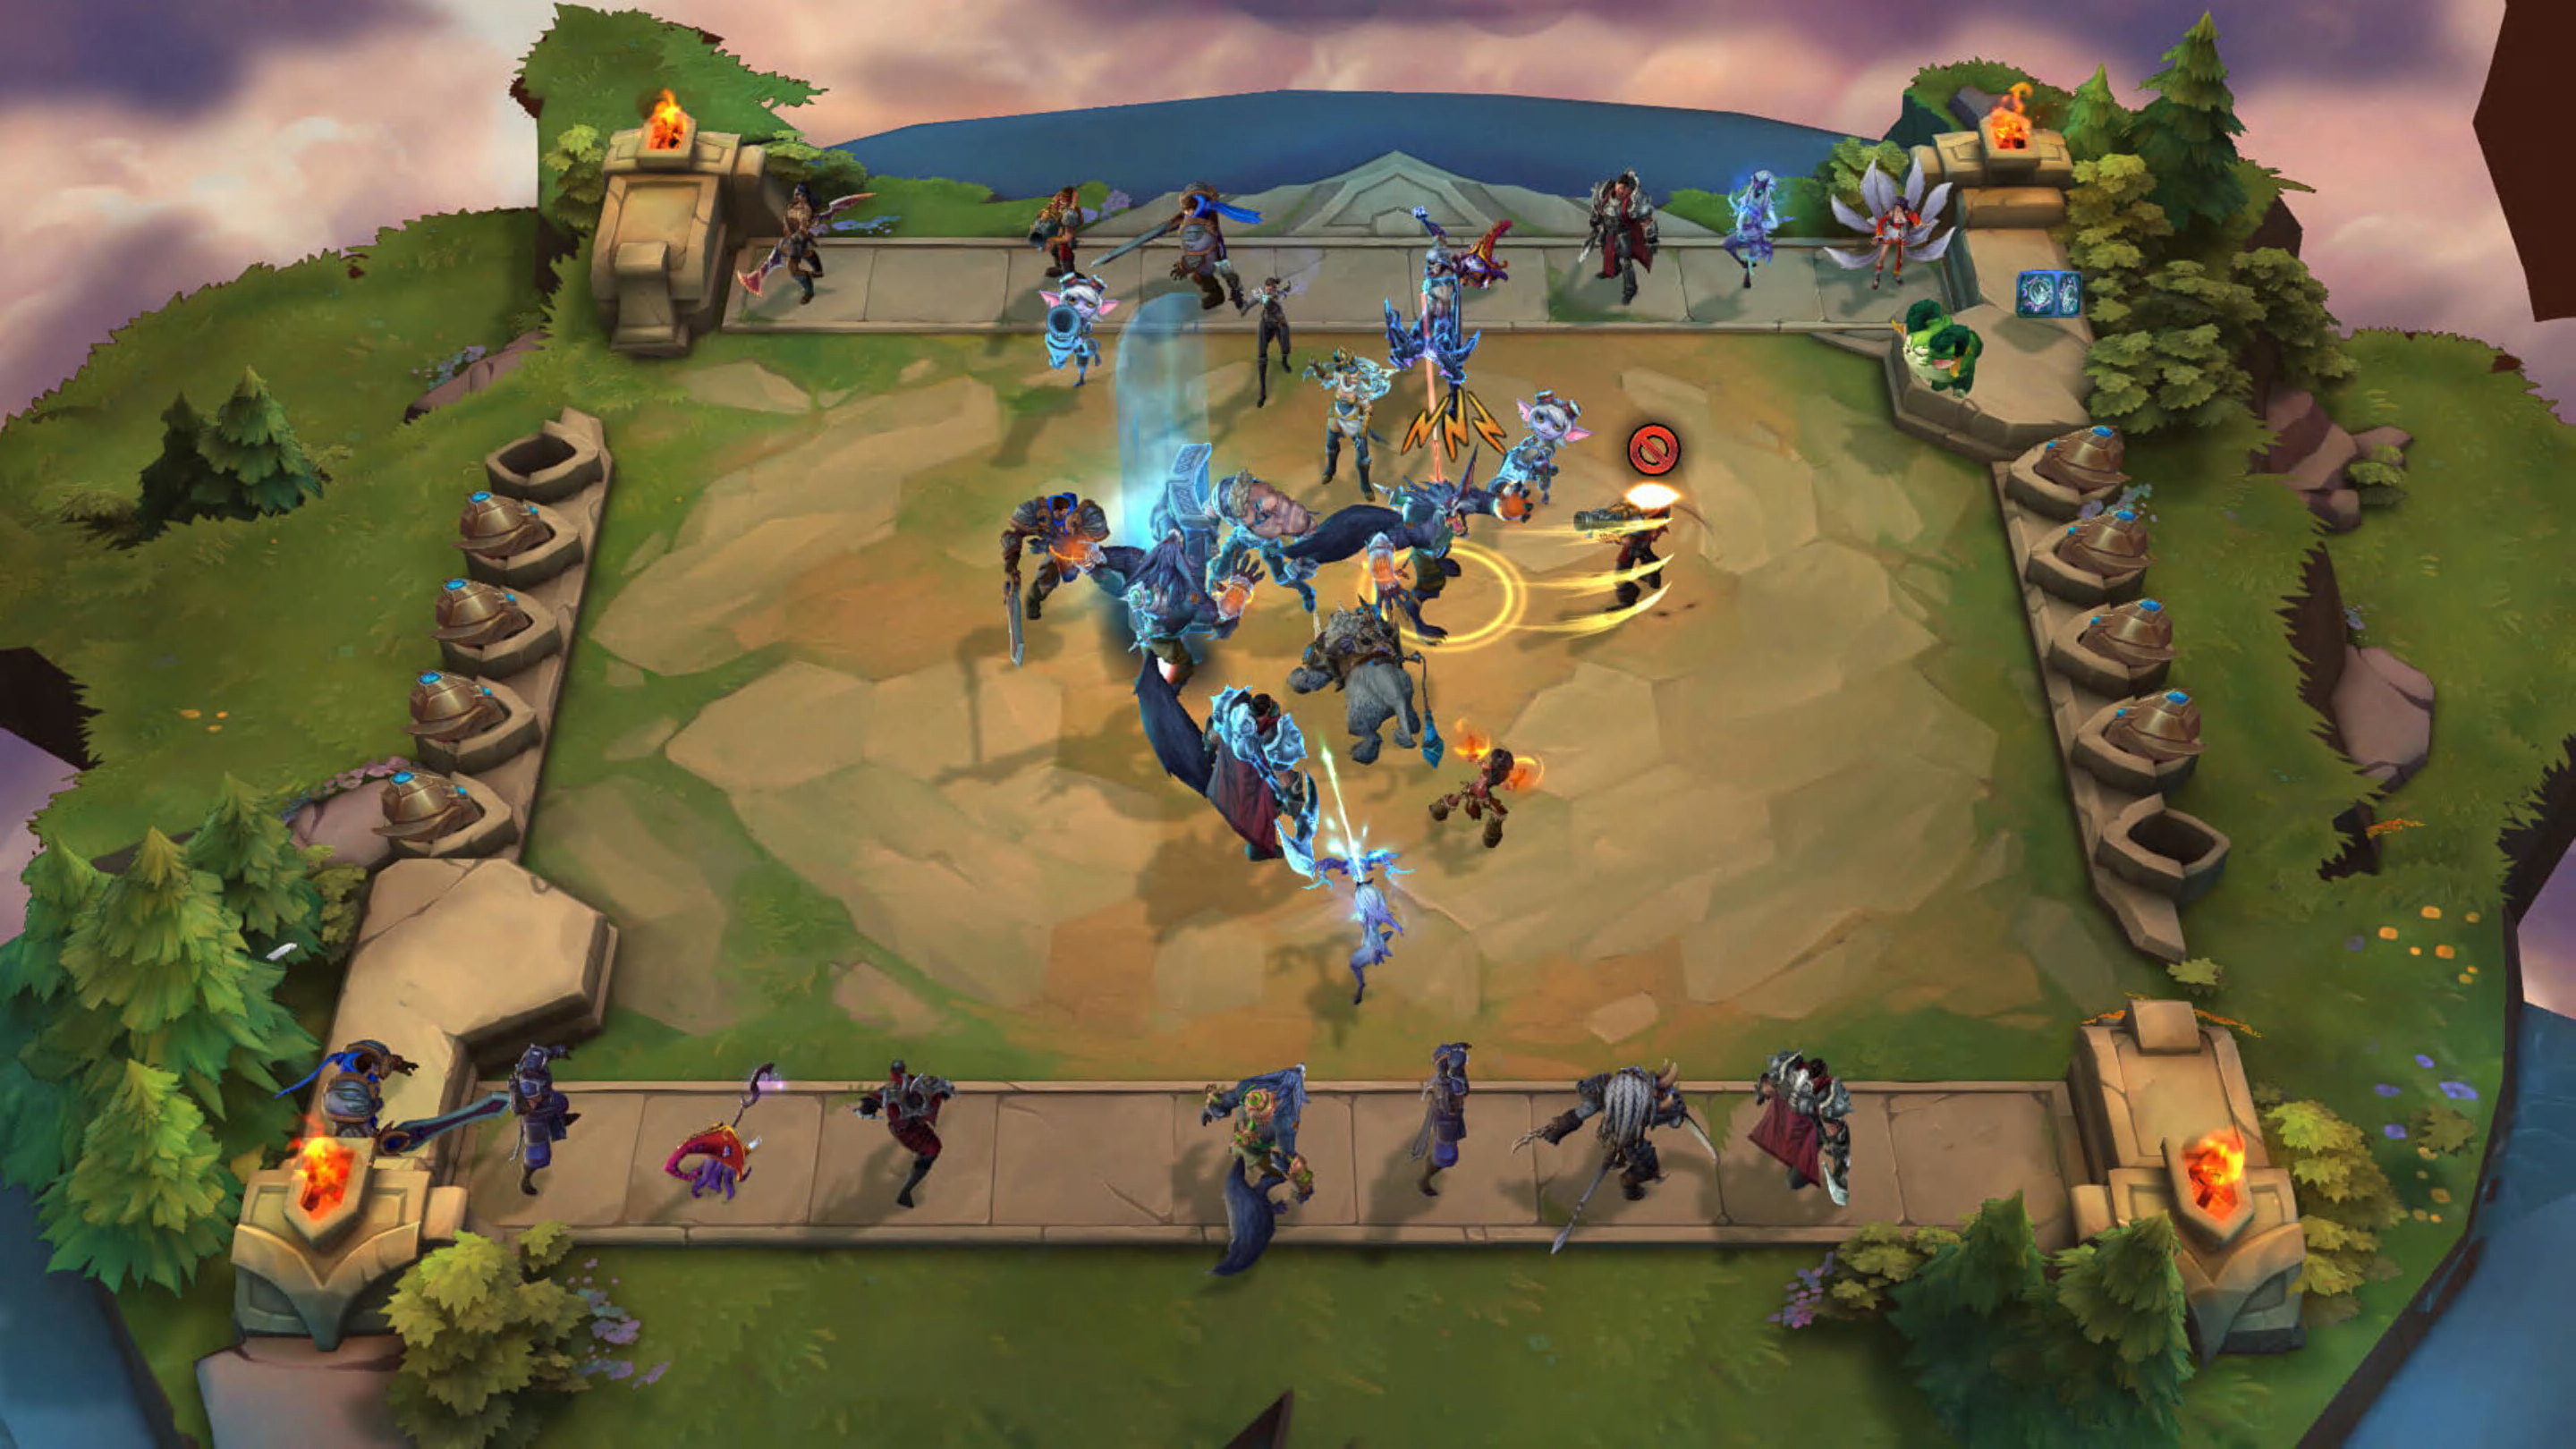 Teamfight Tactics Gizmos & Gadgets hands-on preview: New